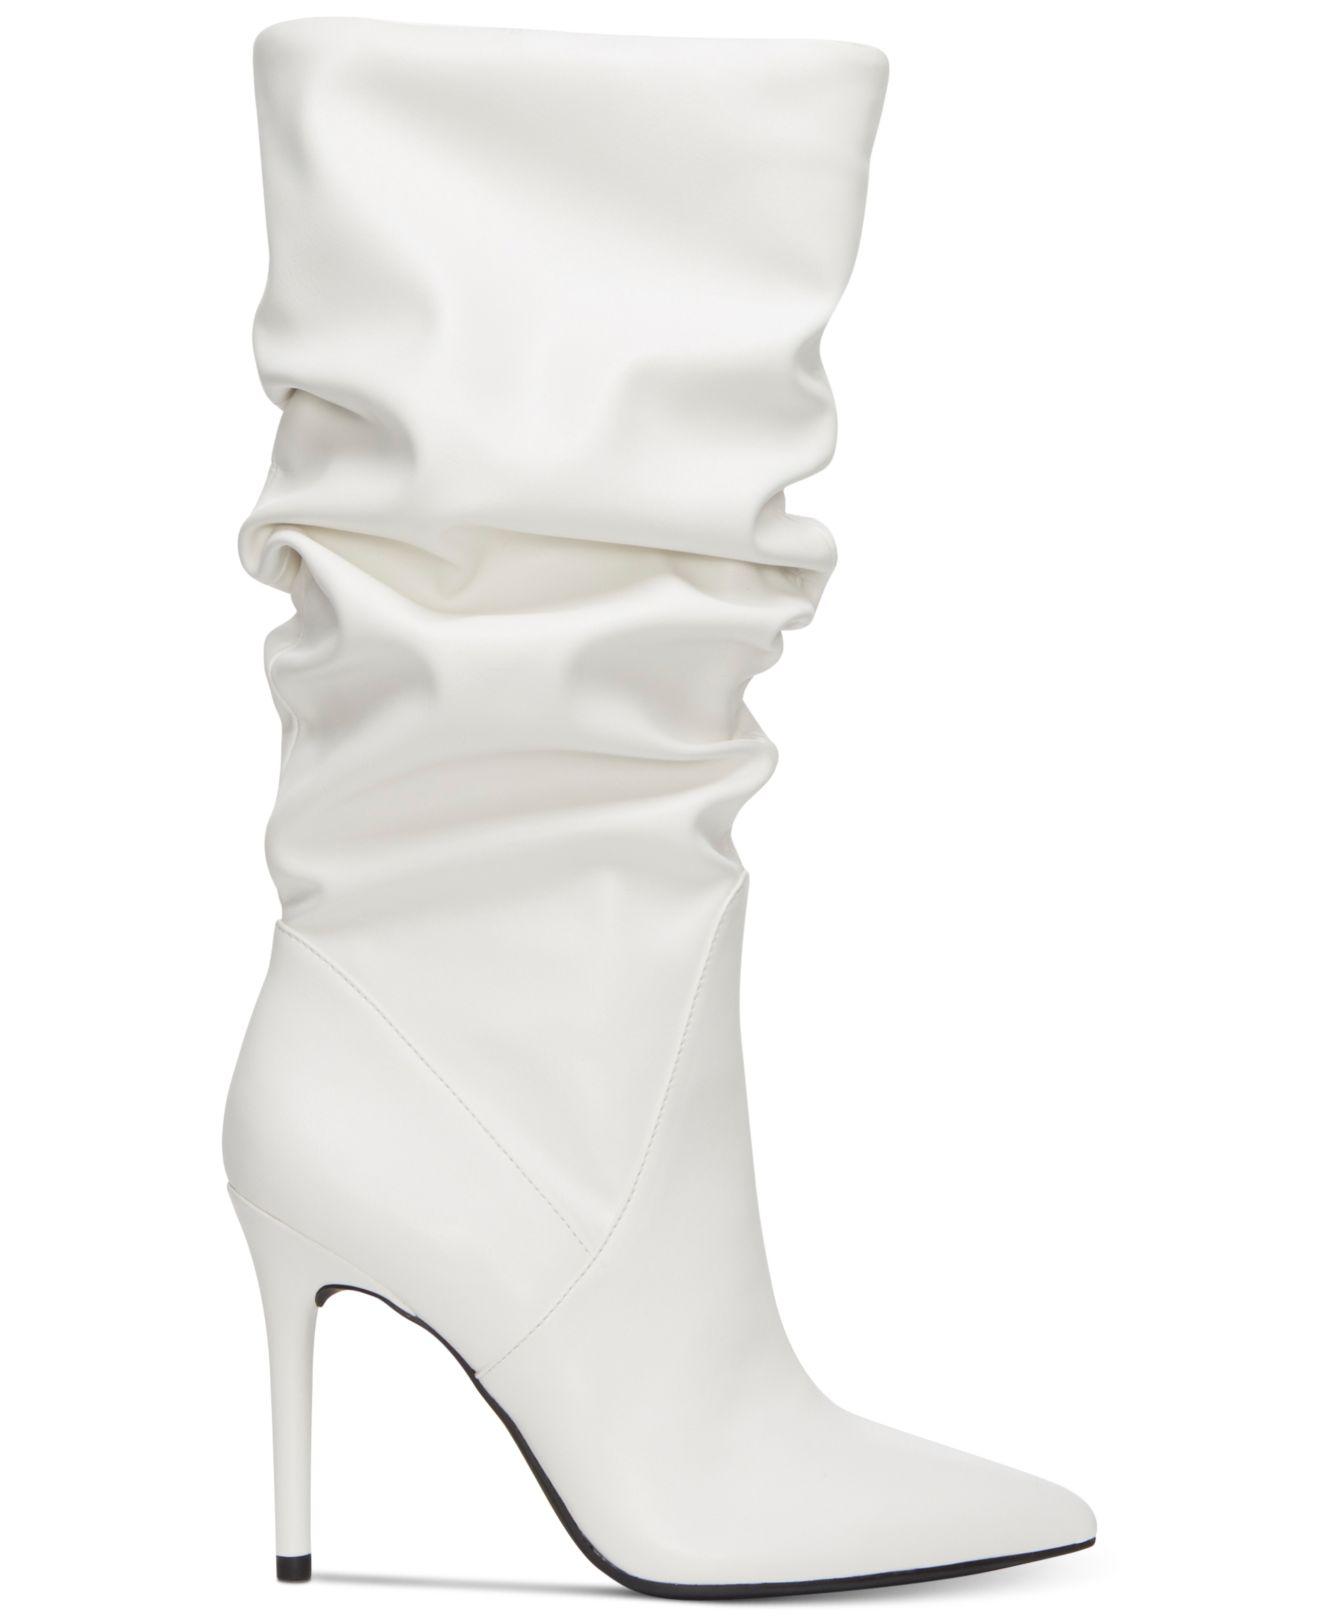 Jessica Simpson Lyndy Slouch Boots in White - Lyst